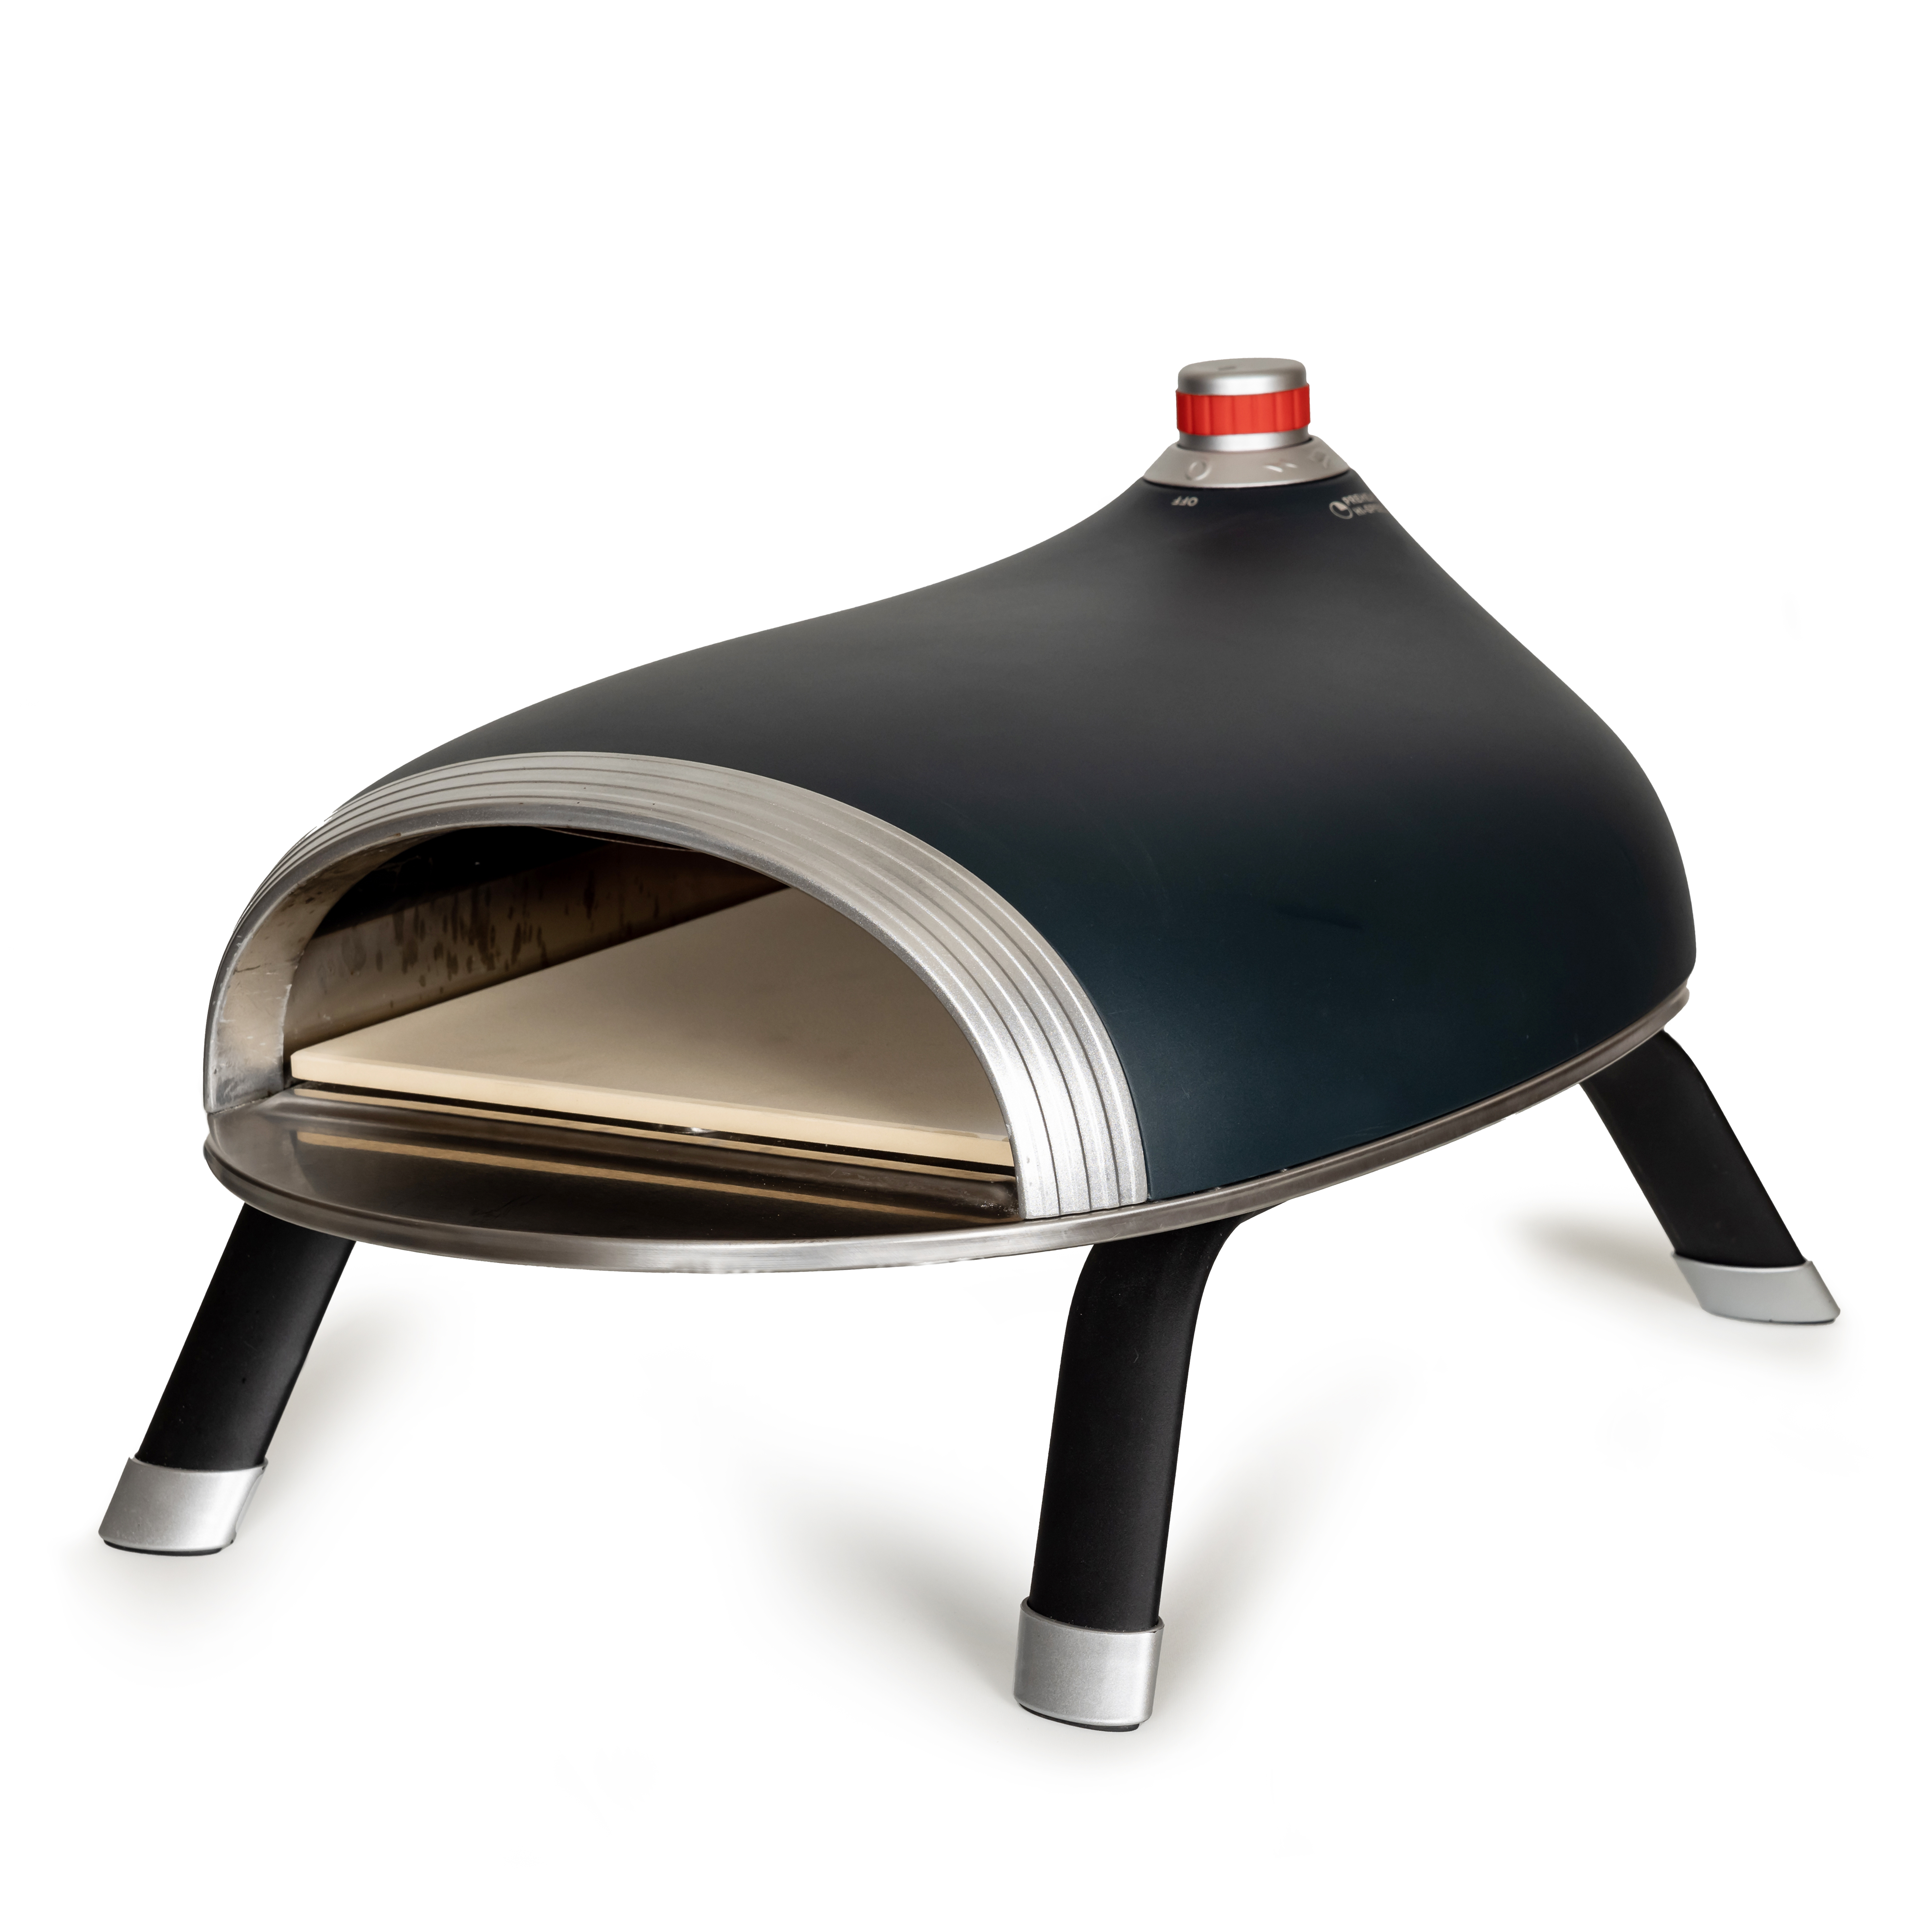 You could win this pizza oven worth £350